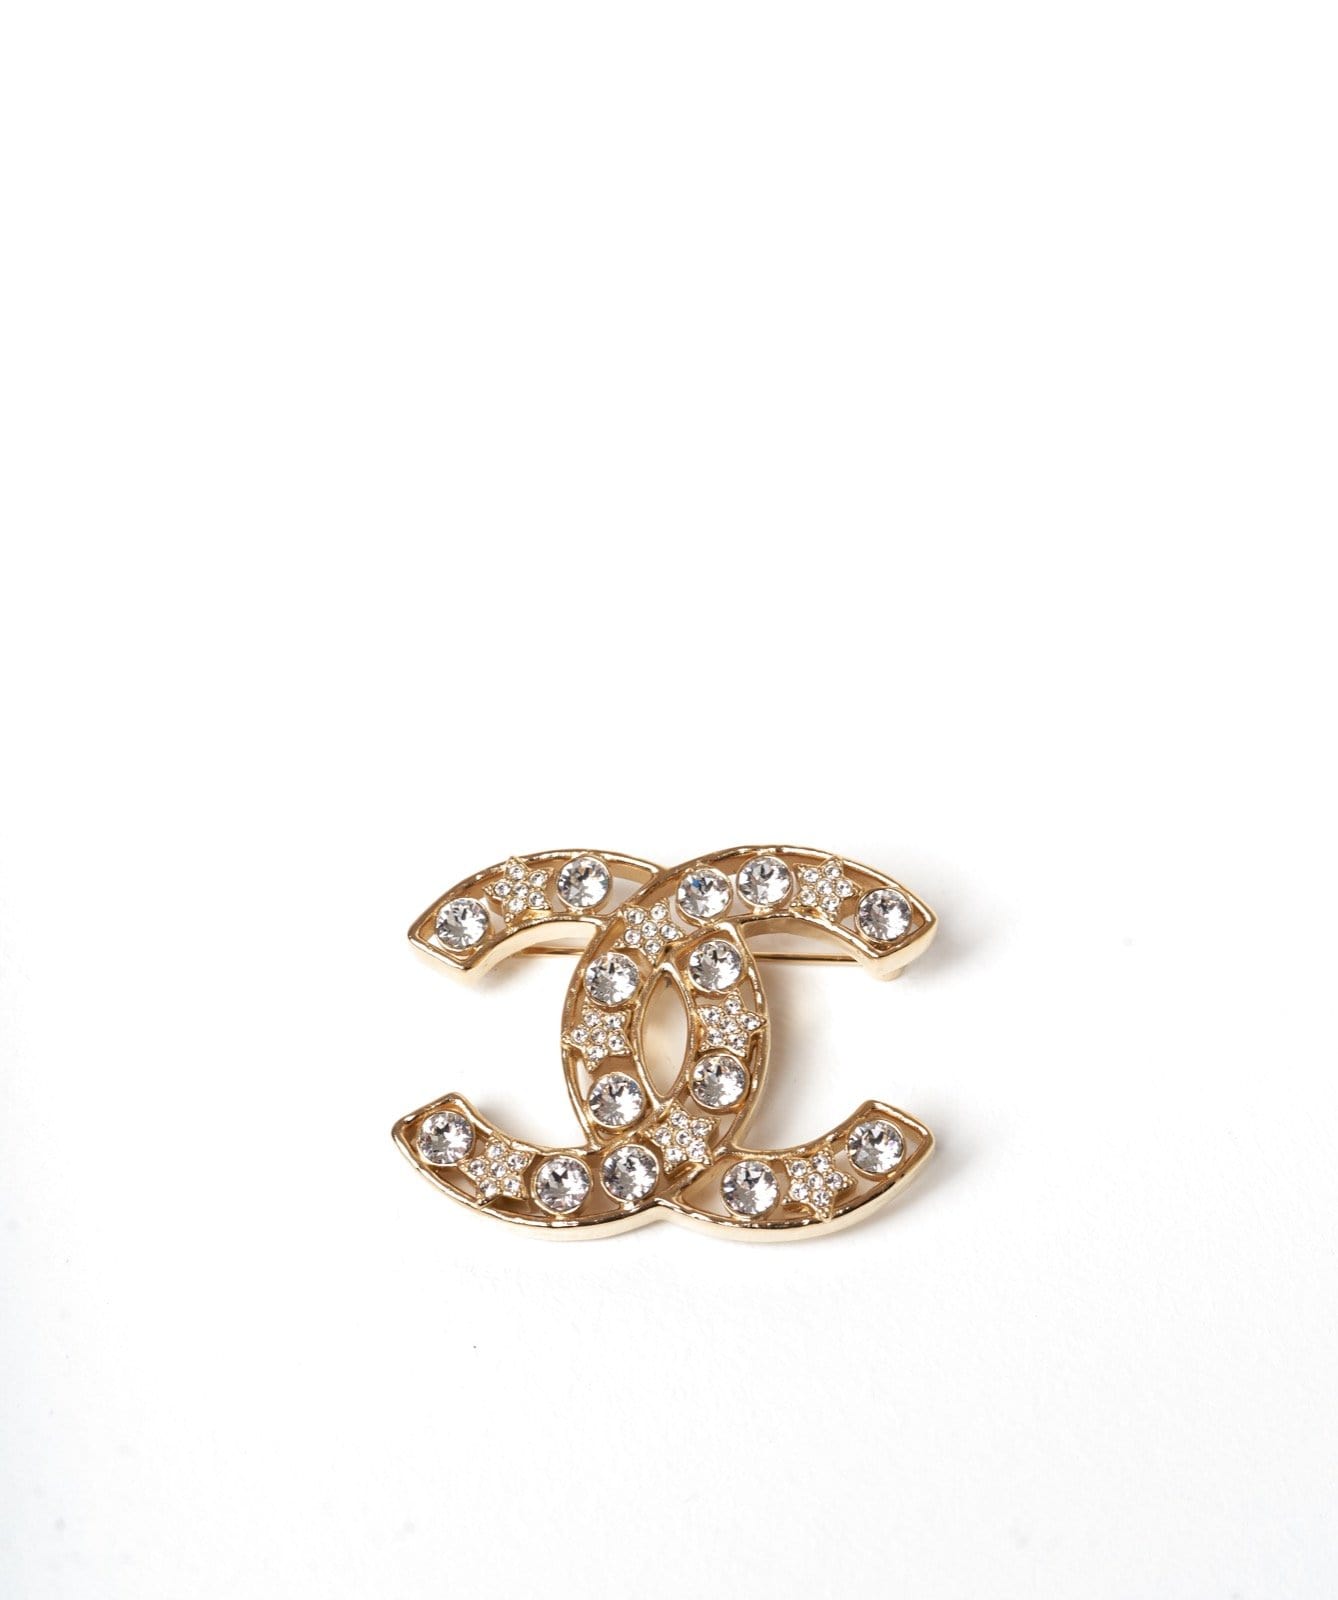 Chanel Chanel CC brooch with crystal stars and diamantes